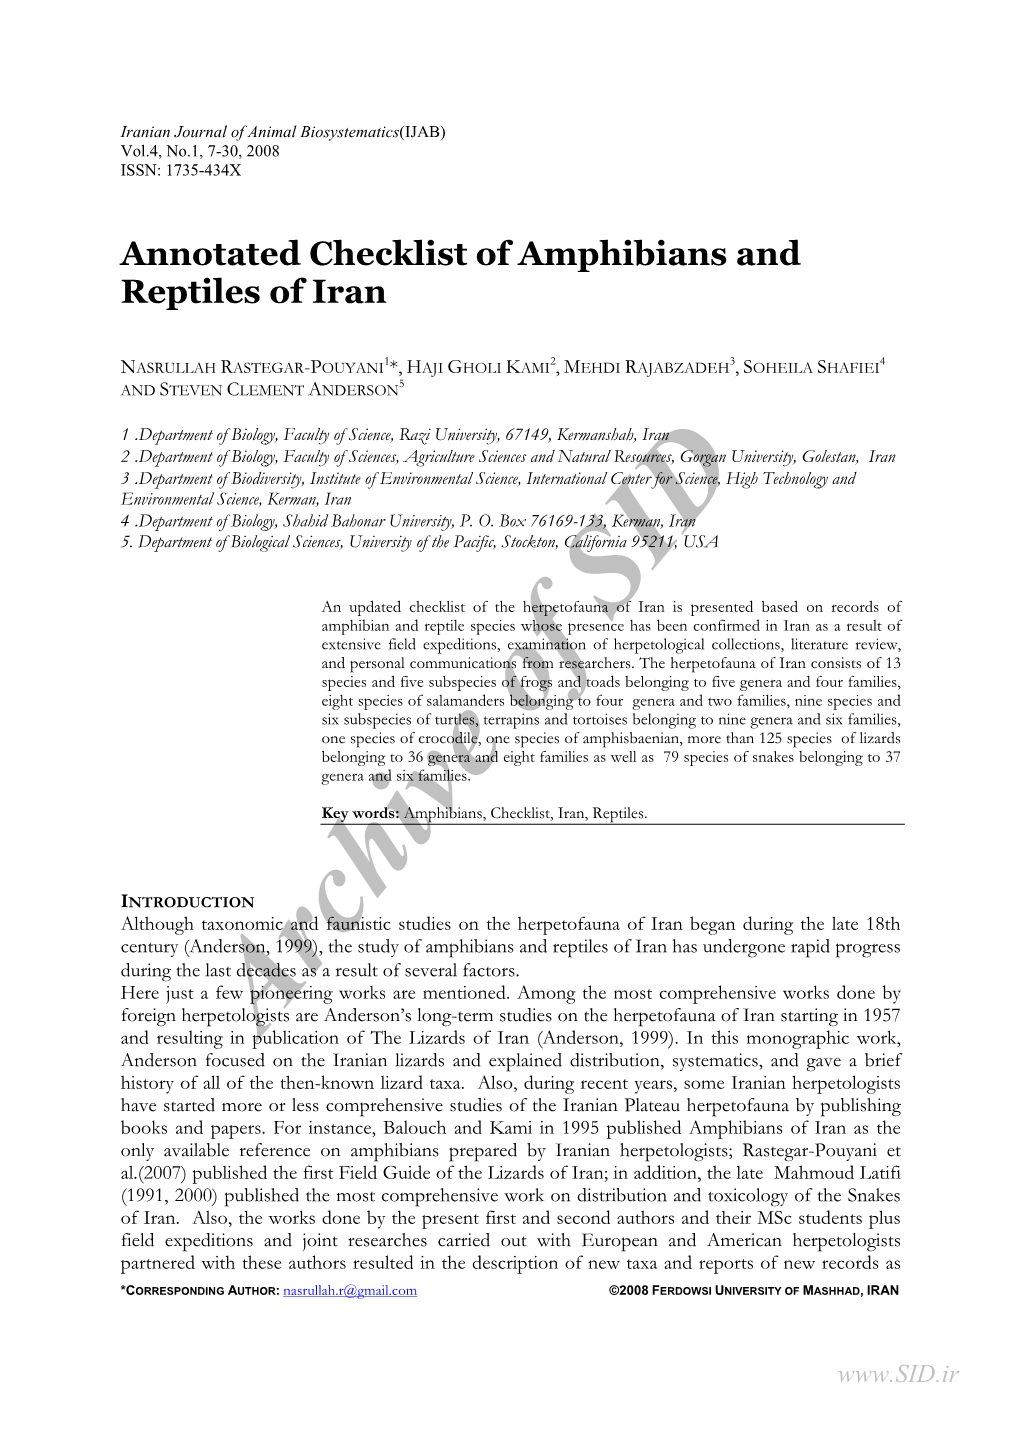 Annotated Checklist of Amphibians and Reptiles of Iran